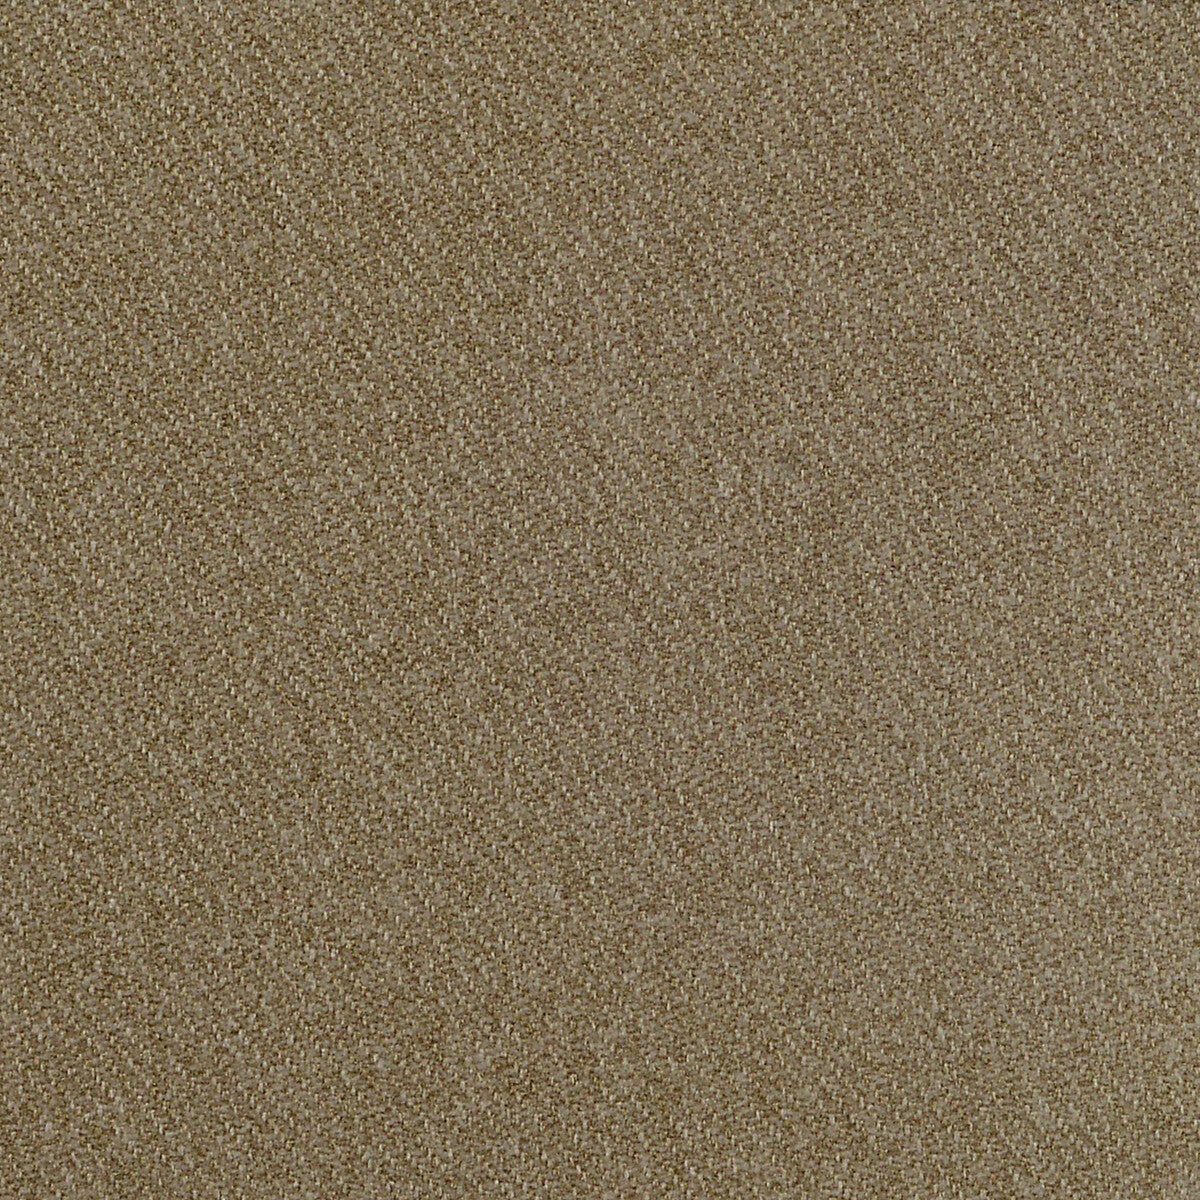 Kravet Contract fabric in 35178-16 color - pattern 35178.16.0 - by Kravet Contract